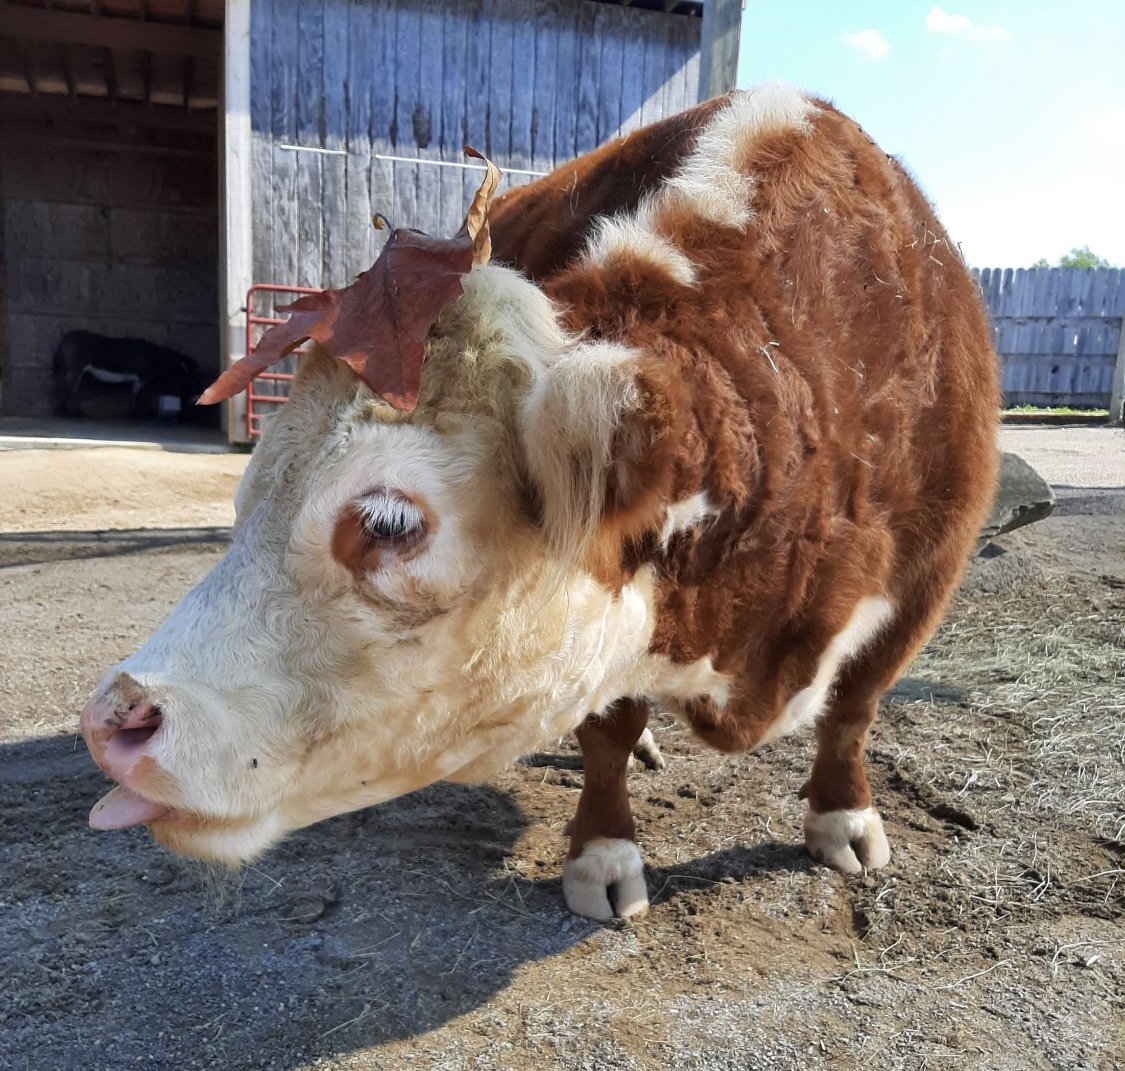 Promise the Miniature Hereford Cow